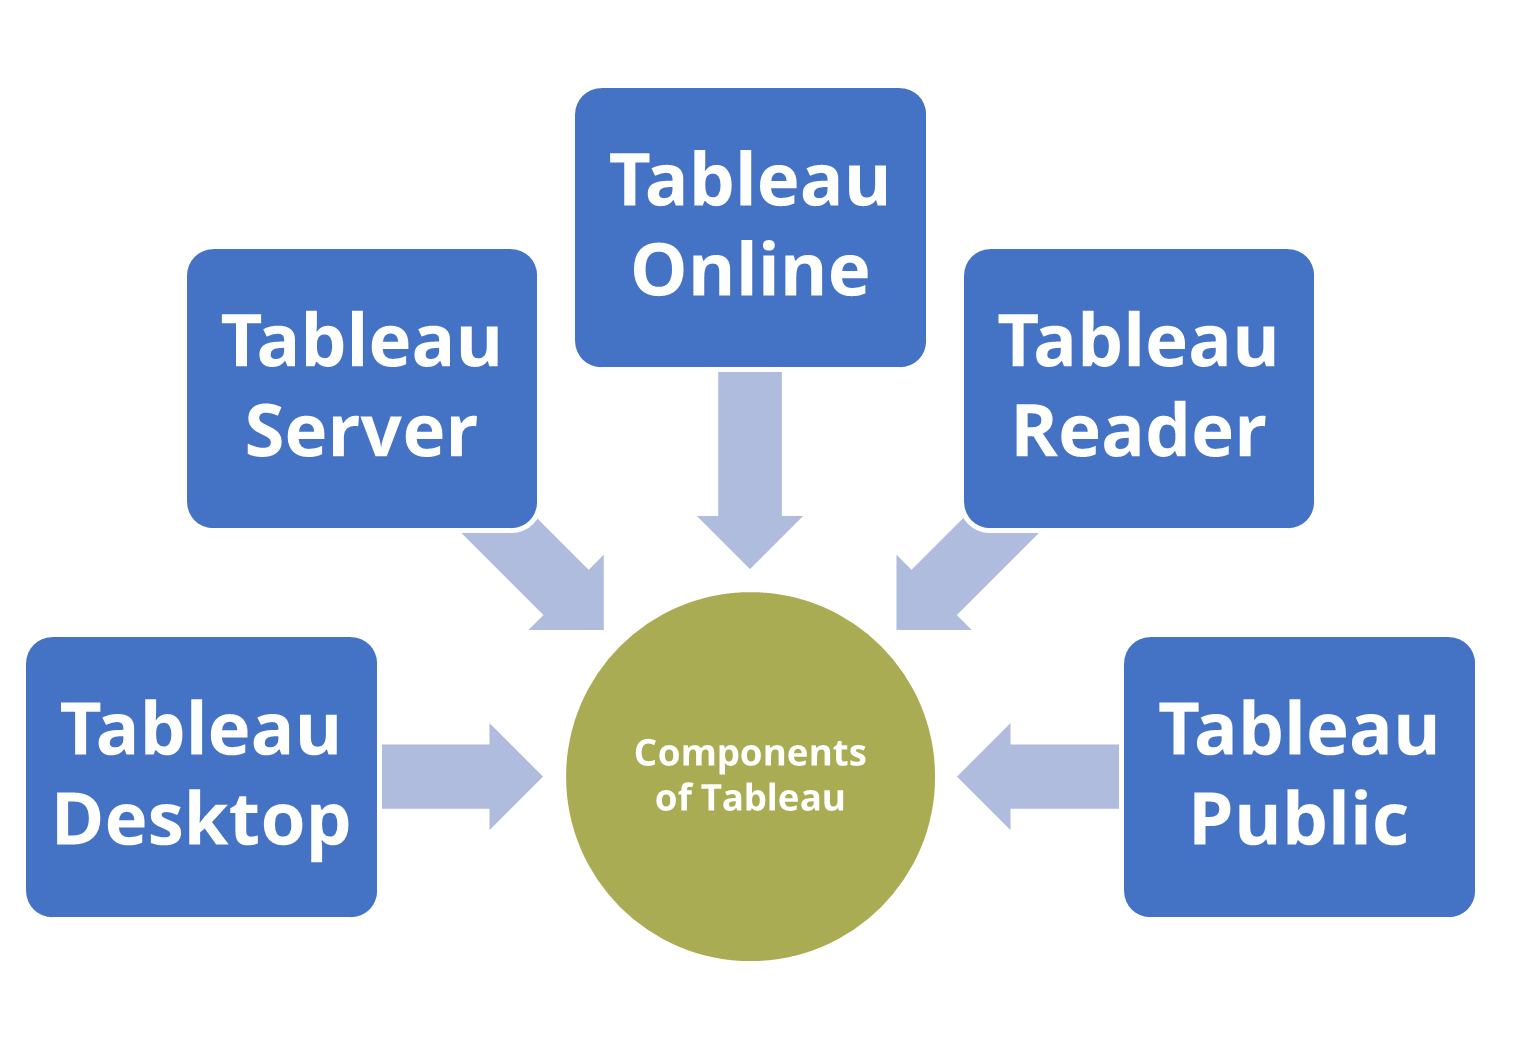 Components of Tableau